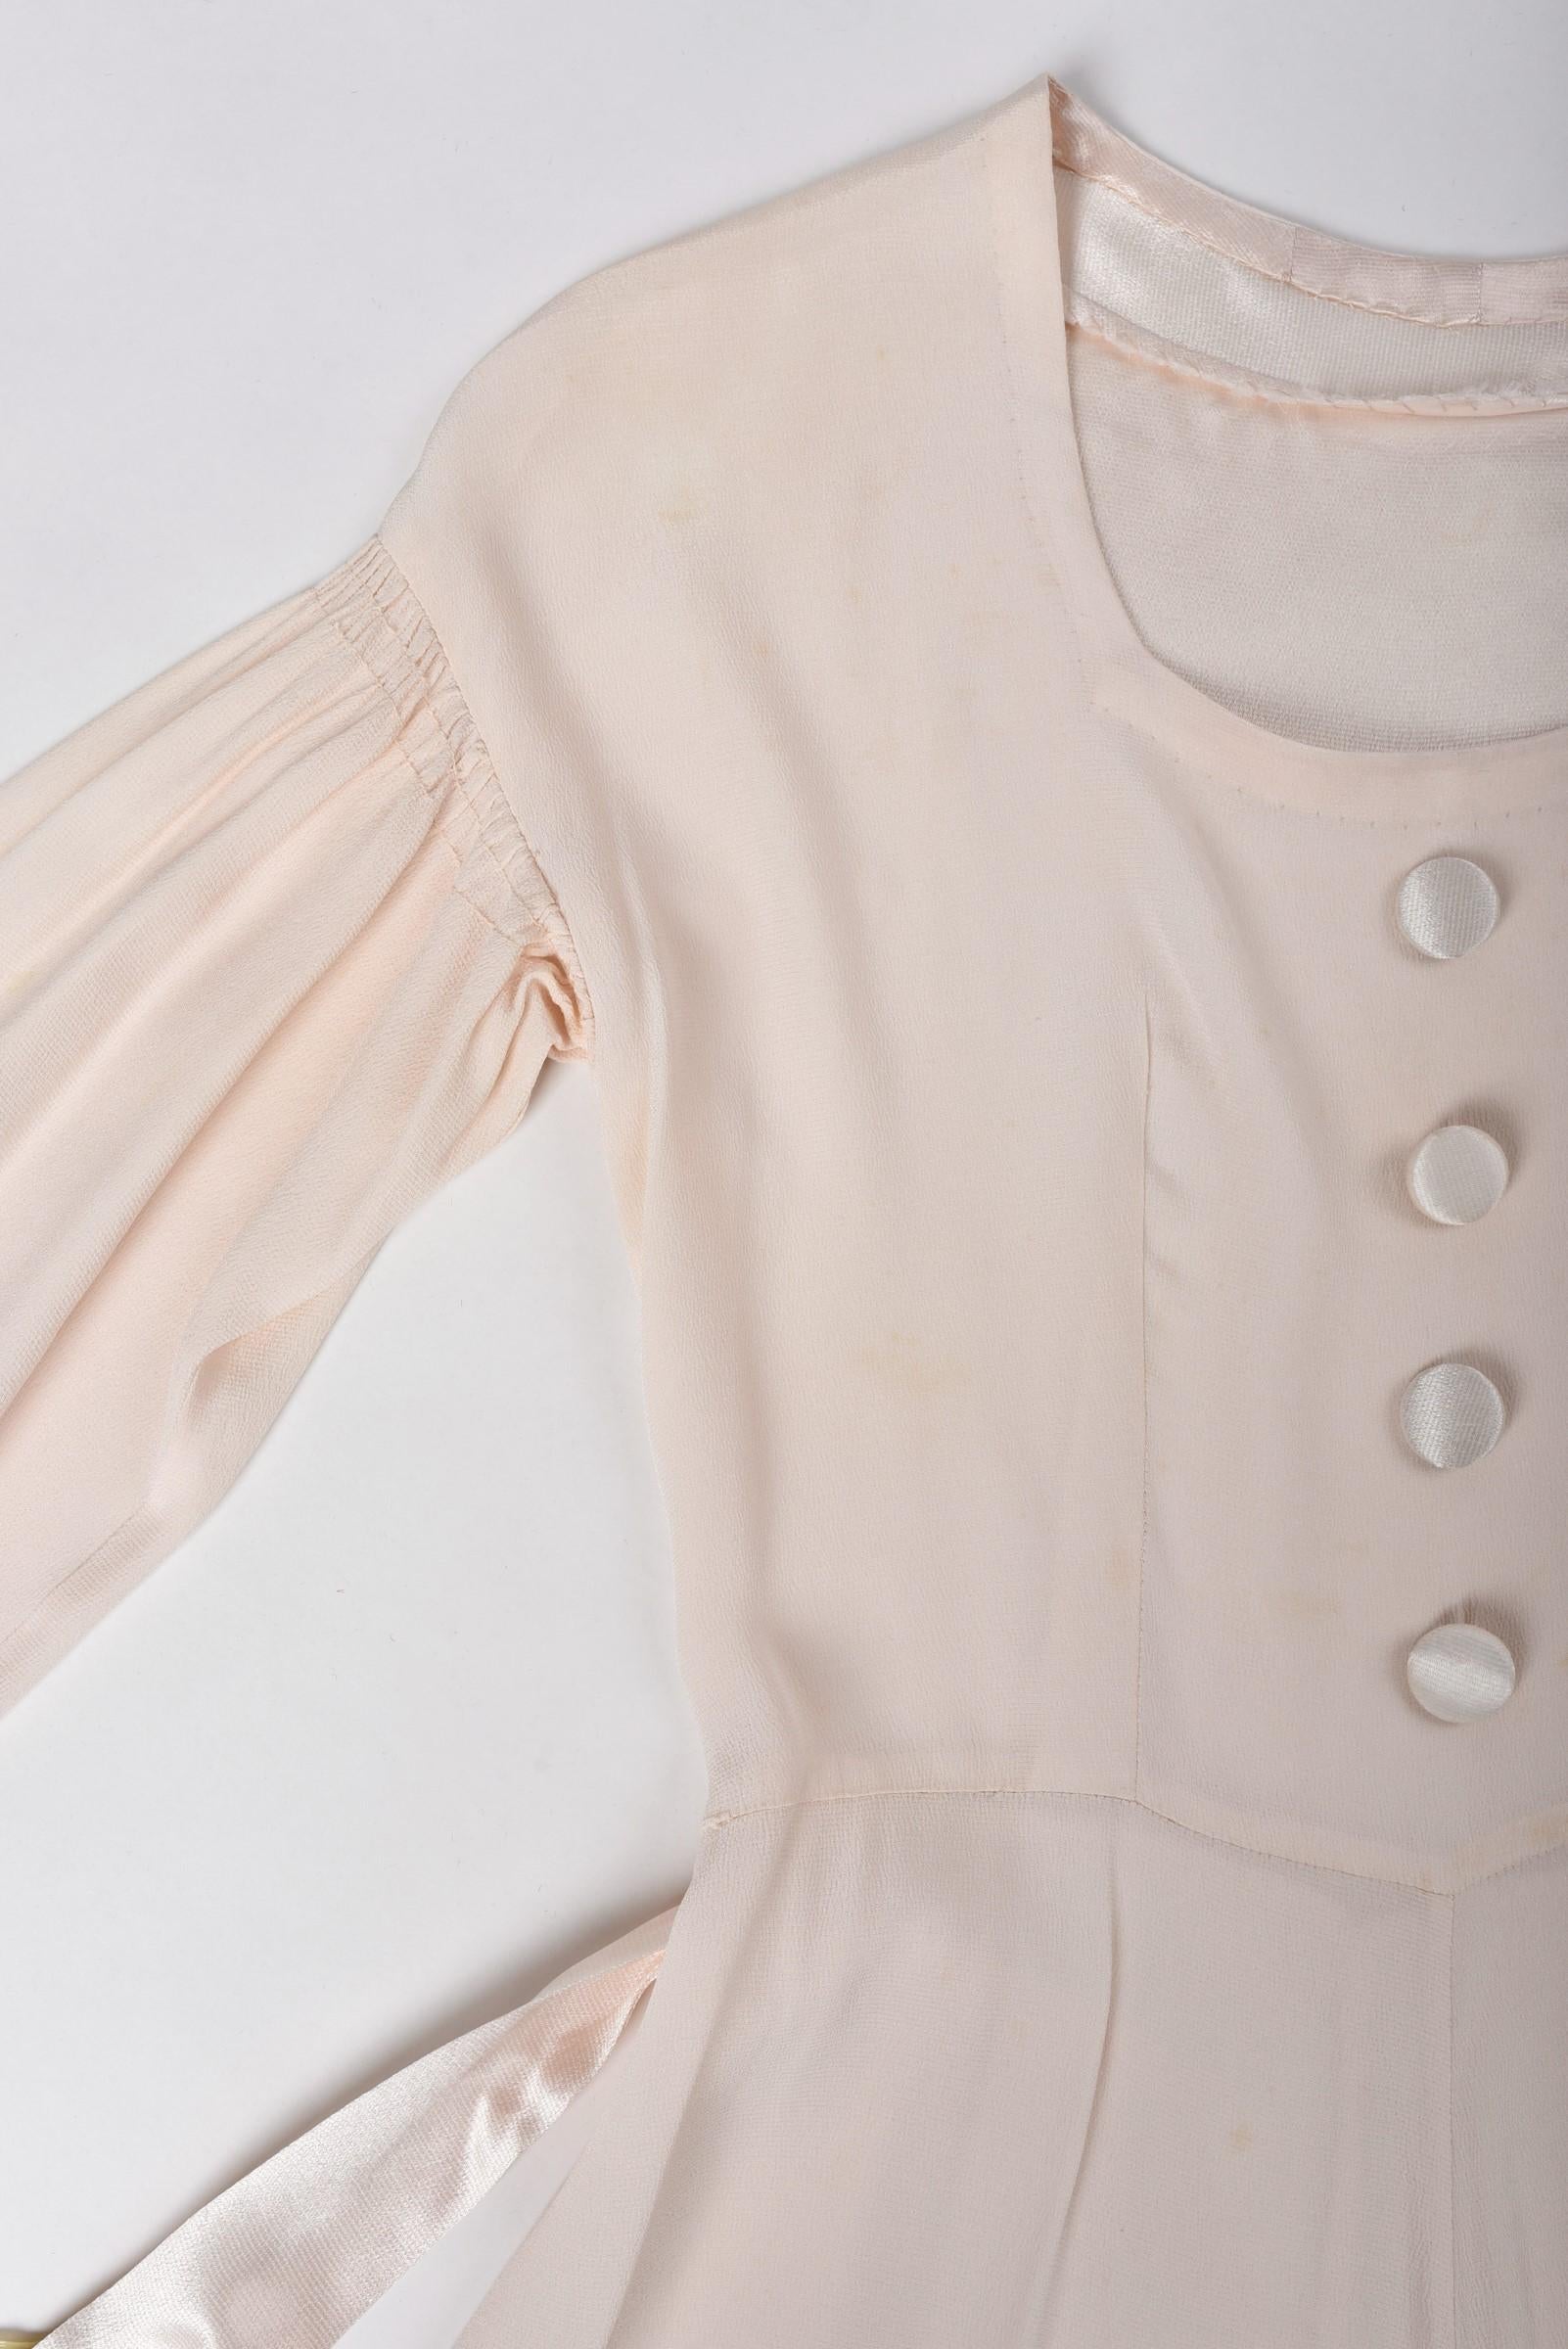 A French Powder Pink Crepe Satin Ceremonial Dress Circa 1940 For Sale ...